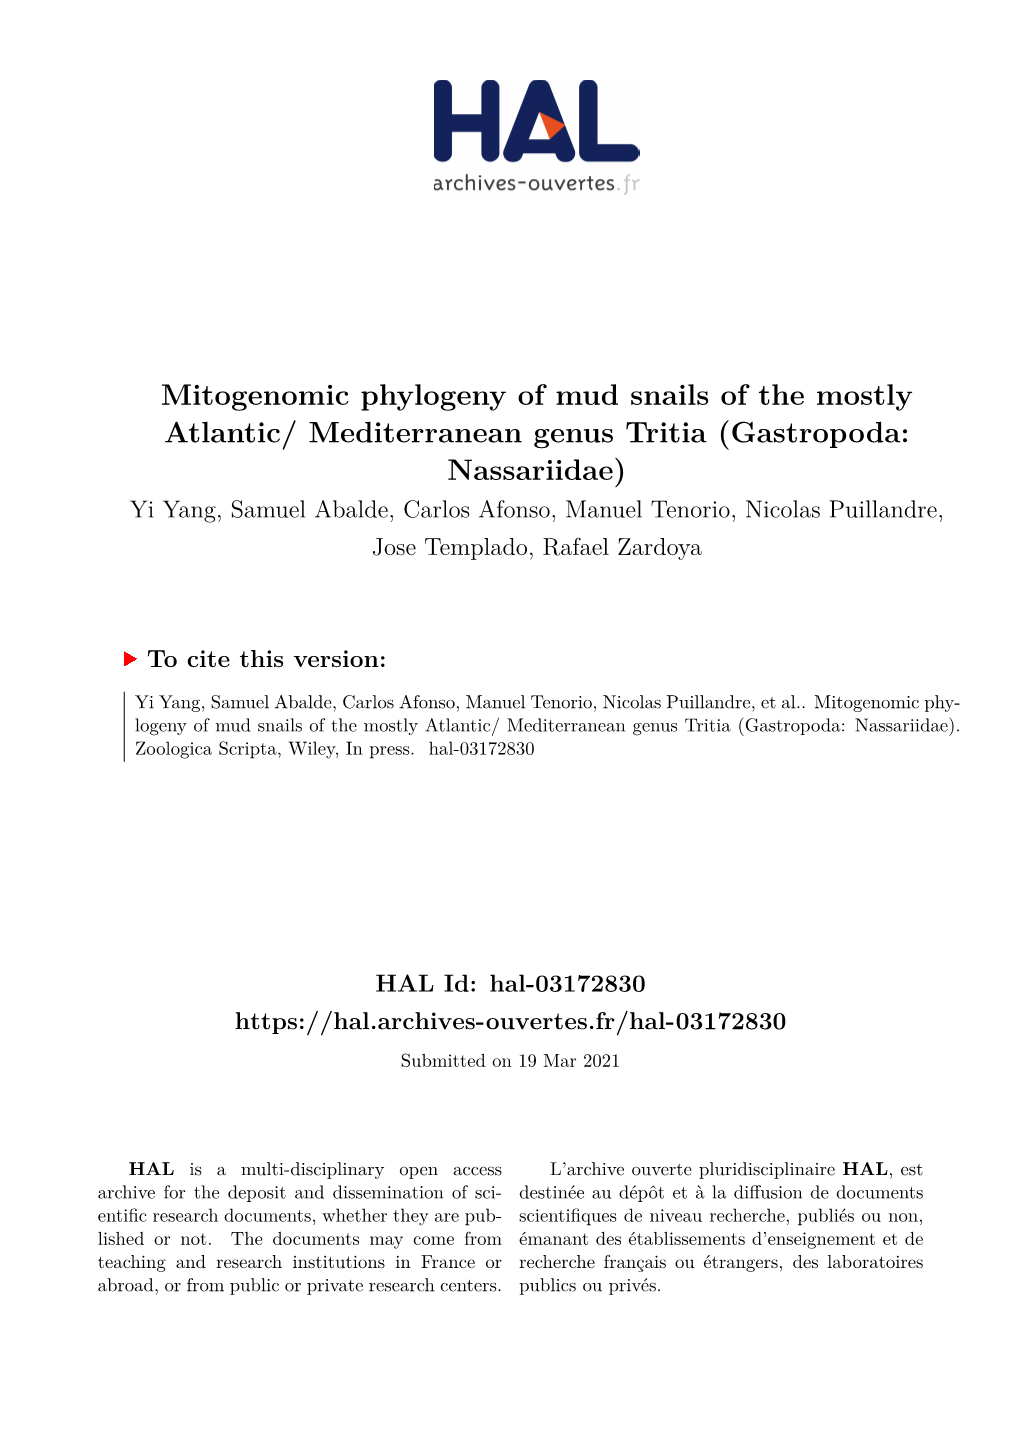 Mitogenomic Phylogeny of Mud Snails of the Mostly Atlantic